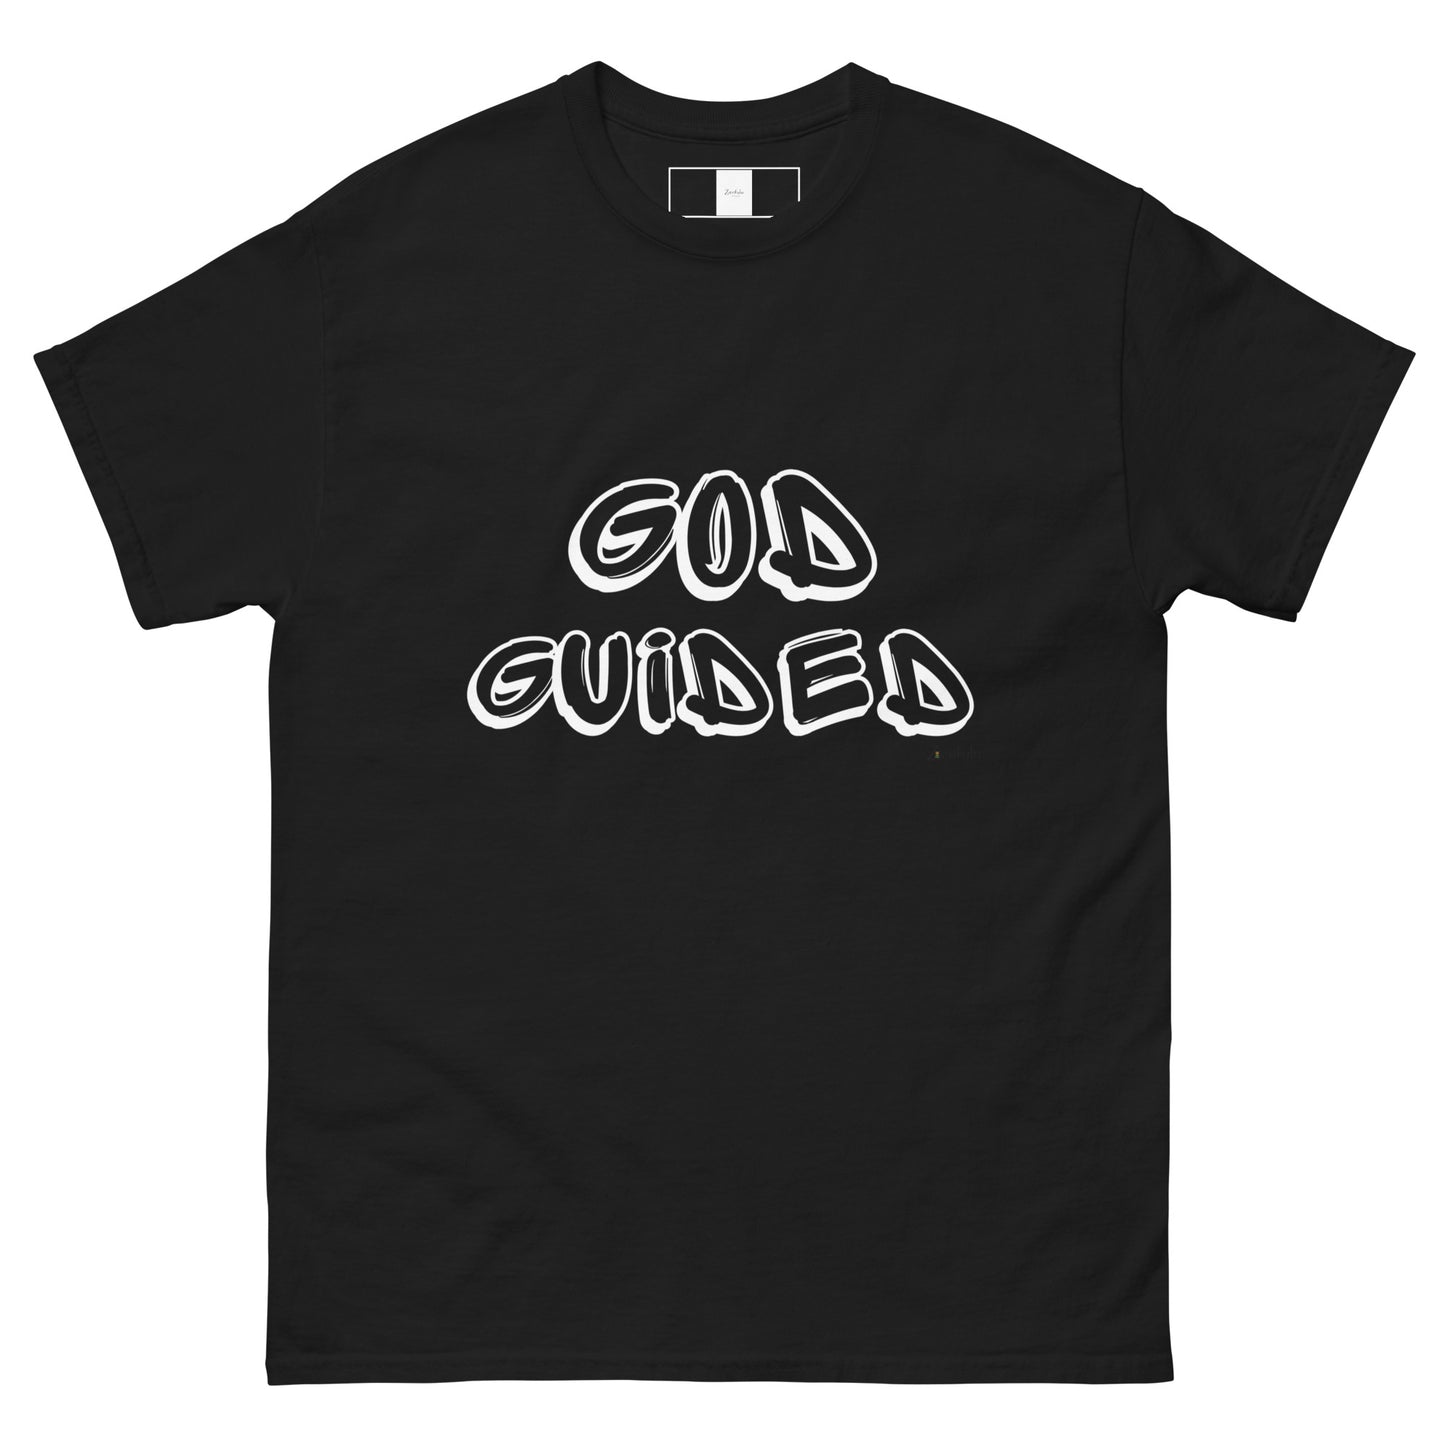 God Guided - Men's Classic Tee